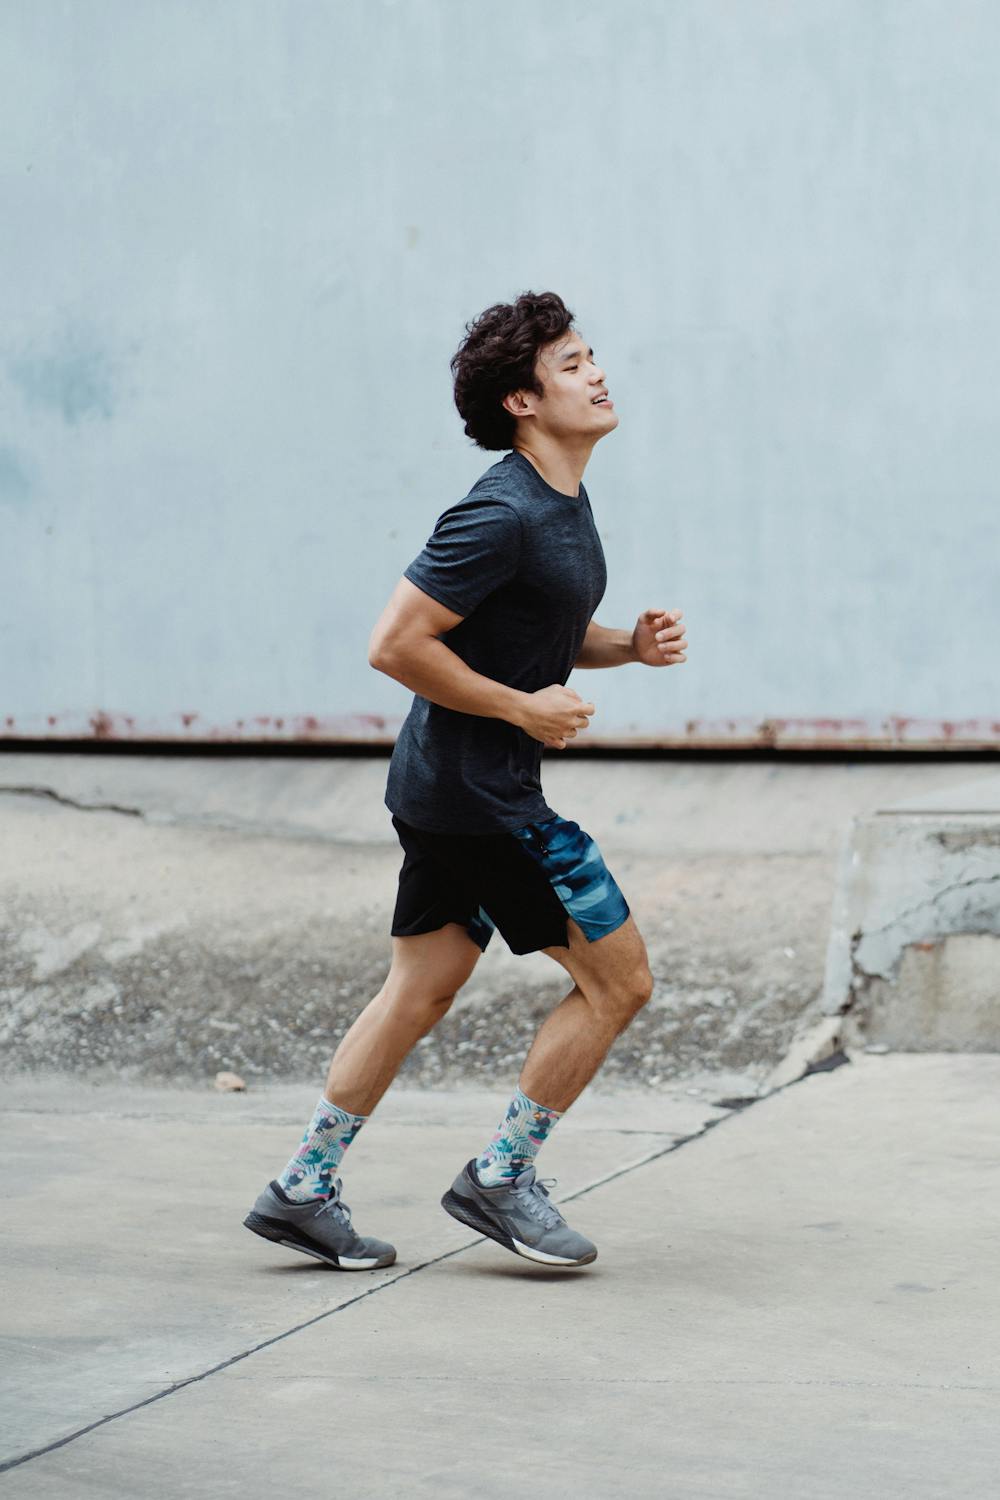 Man in Black T-shirt and Blue Shorts Running on Gray Concrete Road ...